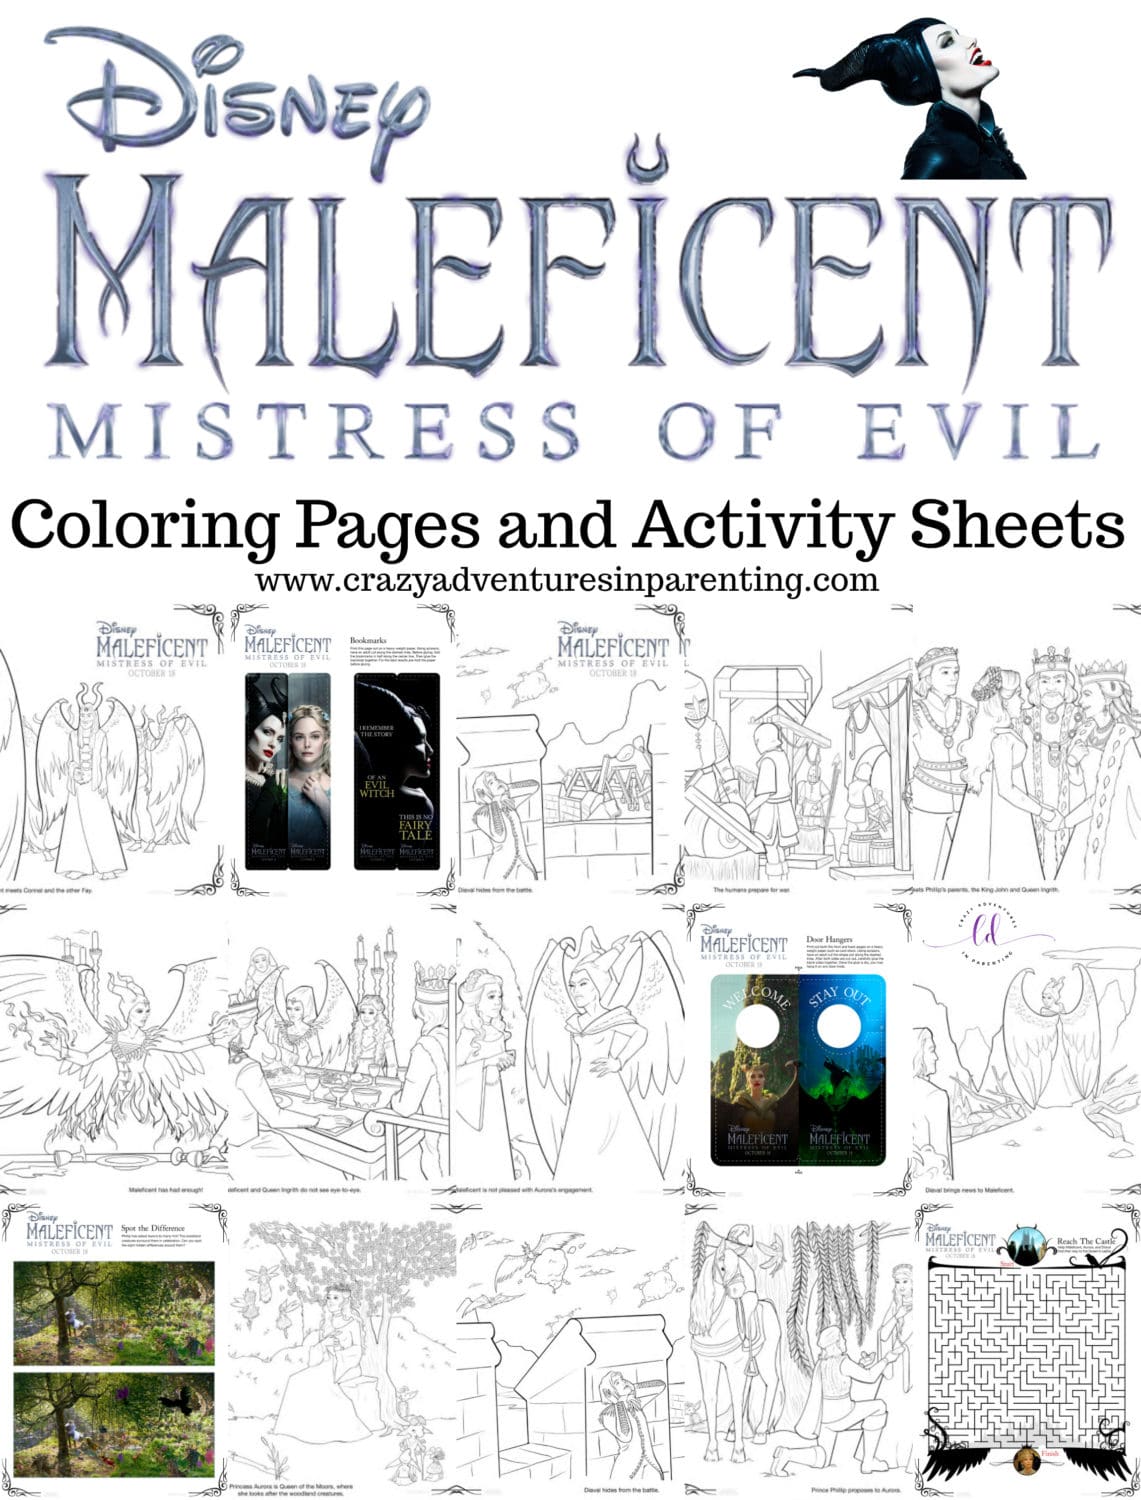 Maleficent Mistress of Evil Coloring Pages and Activity Sheets